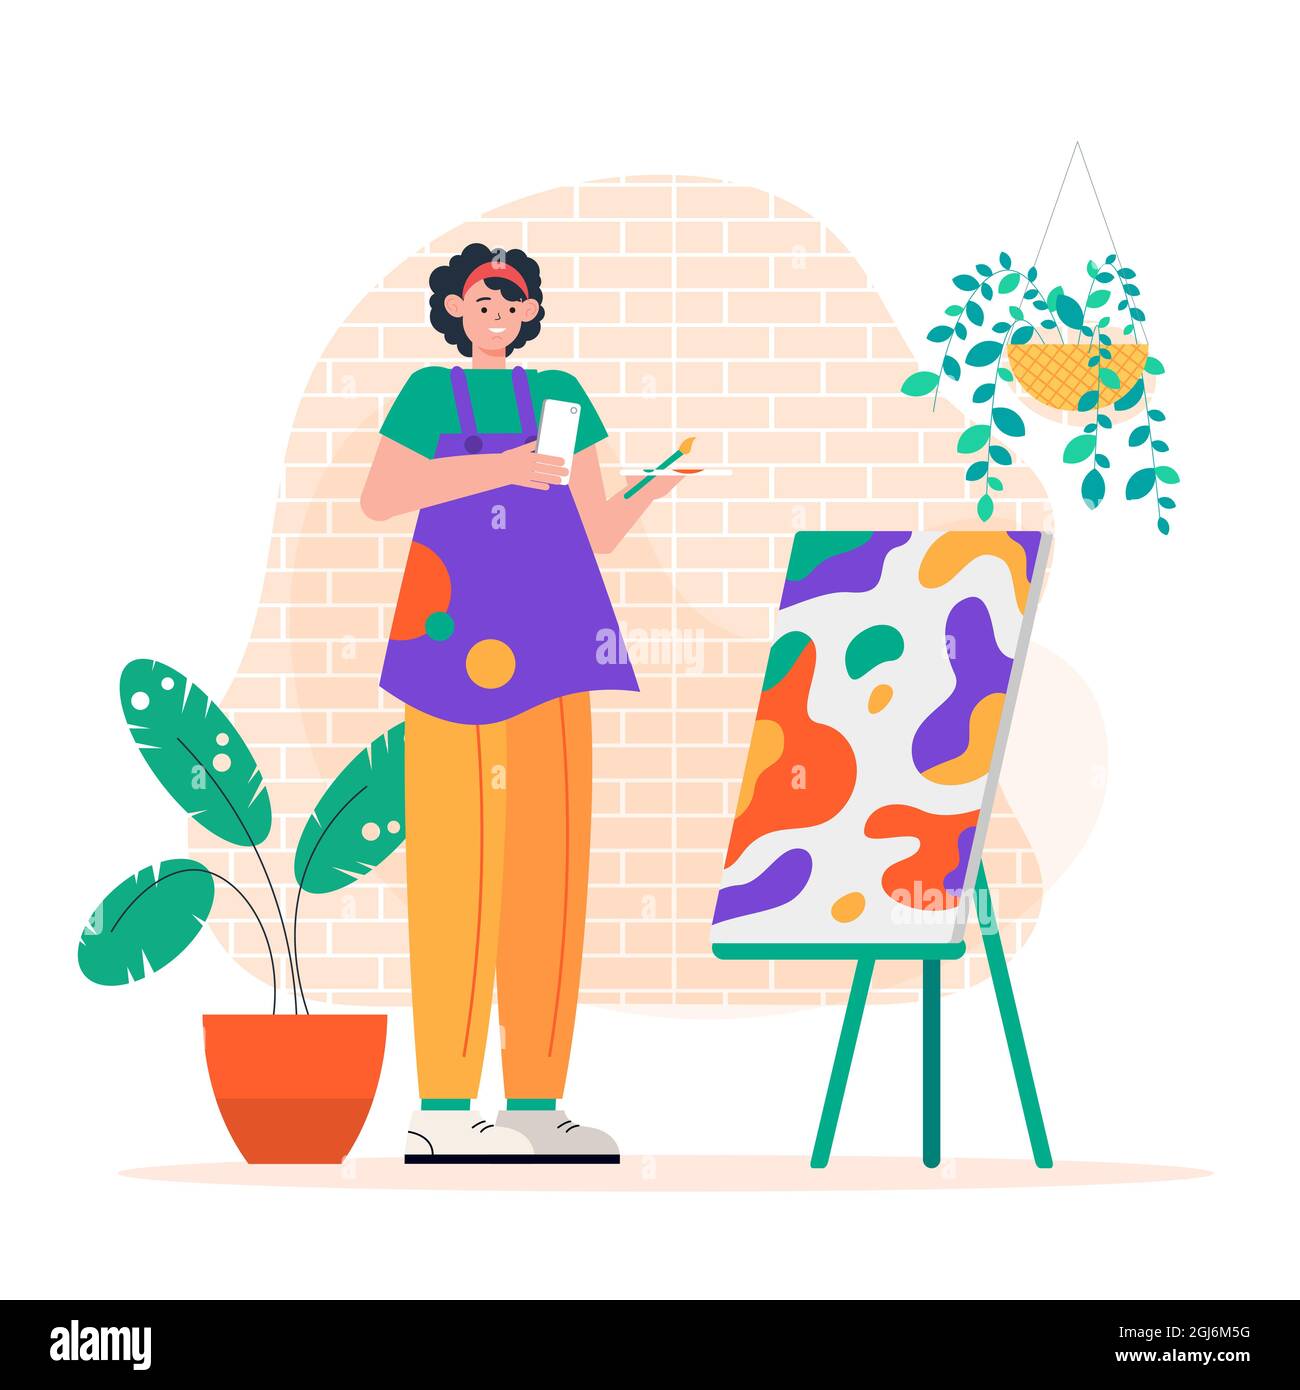 Flat woman taking photos of painting Vector illustration Stock Vector ...